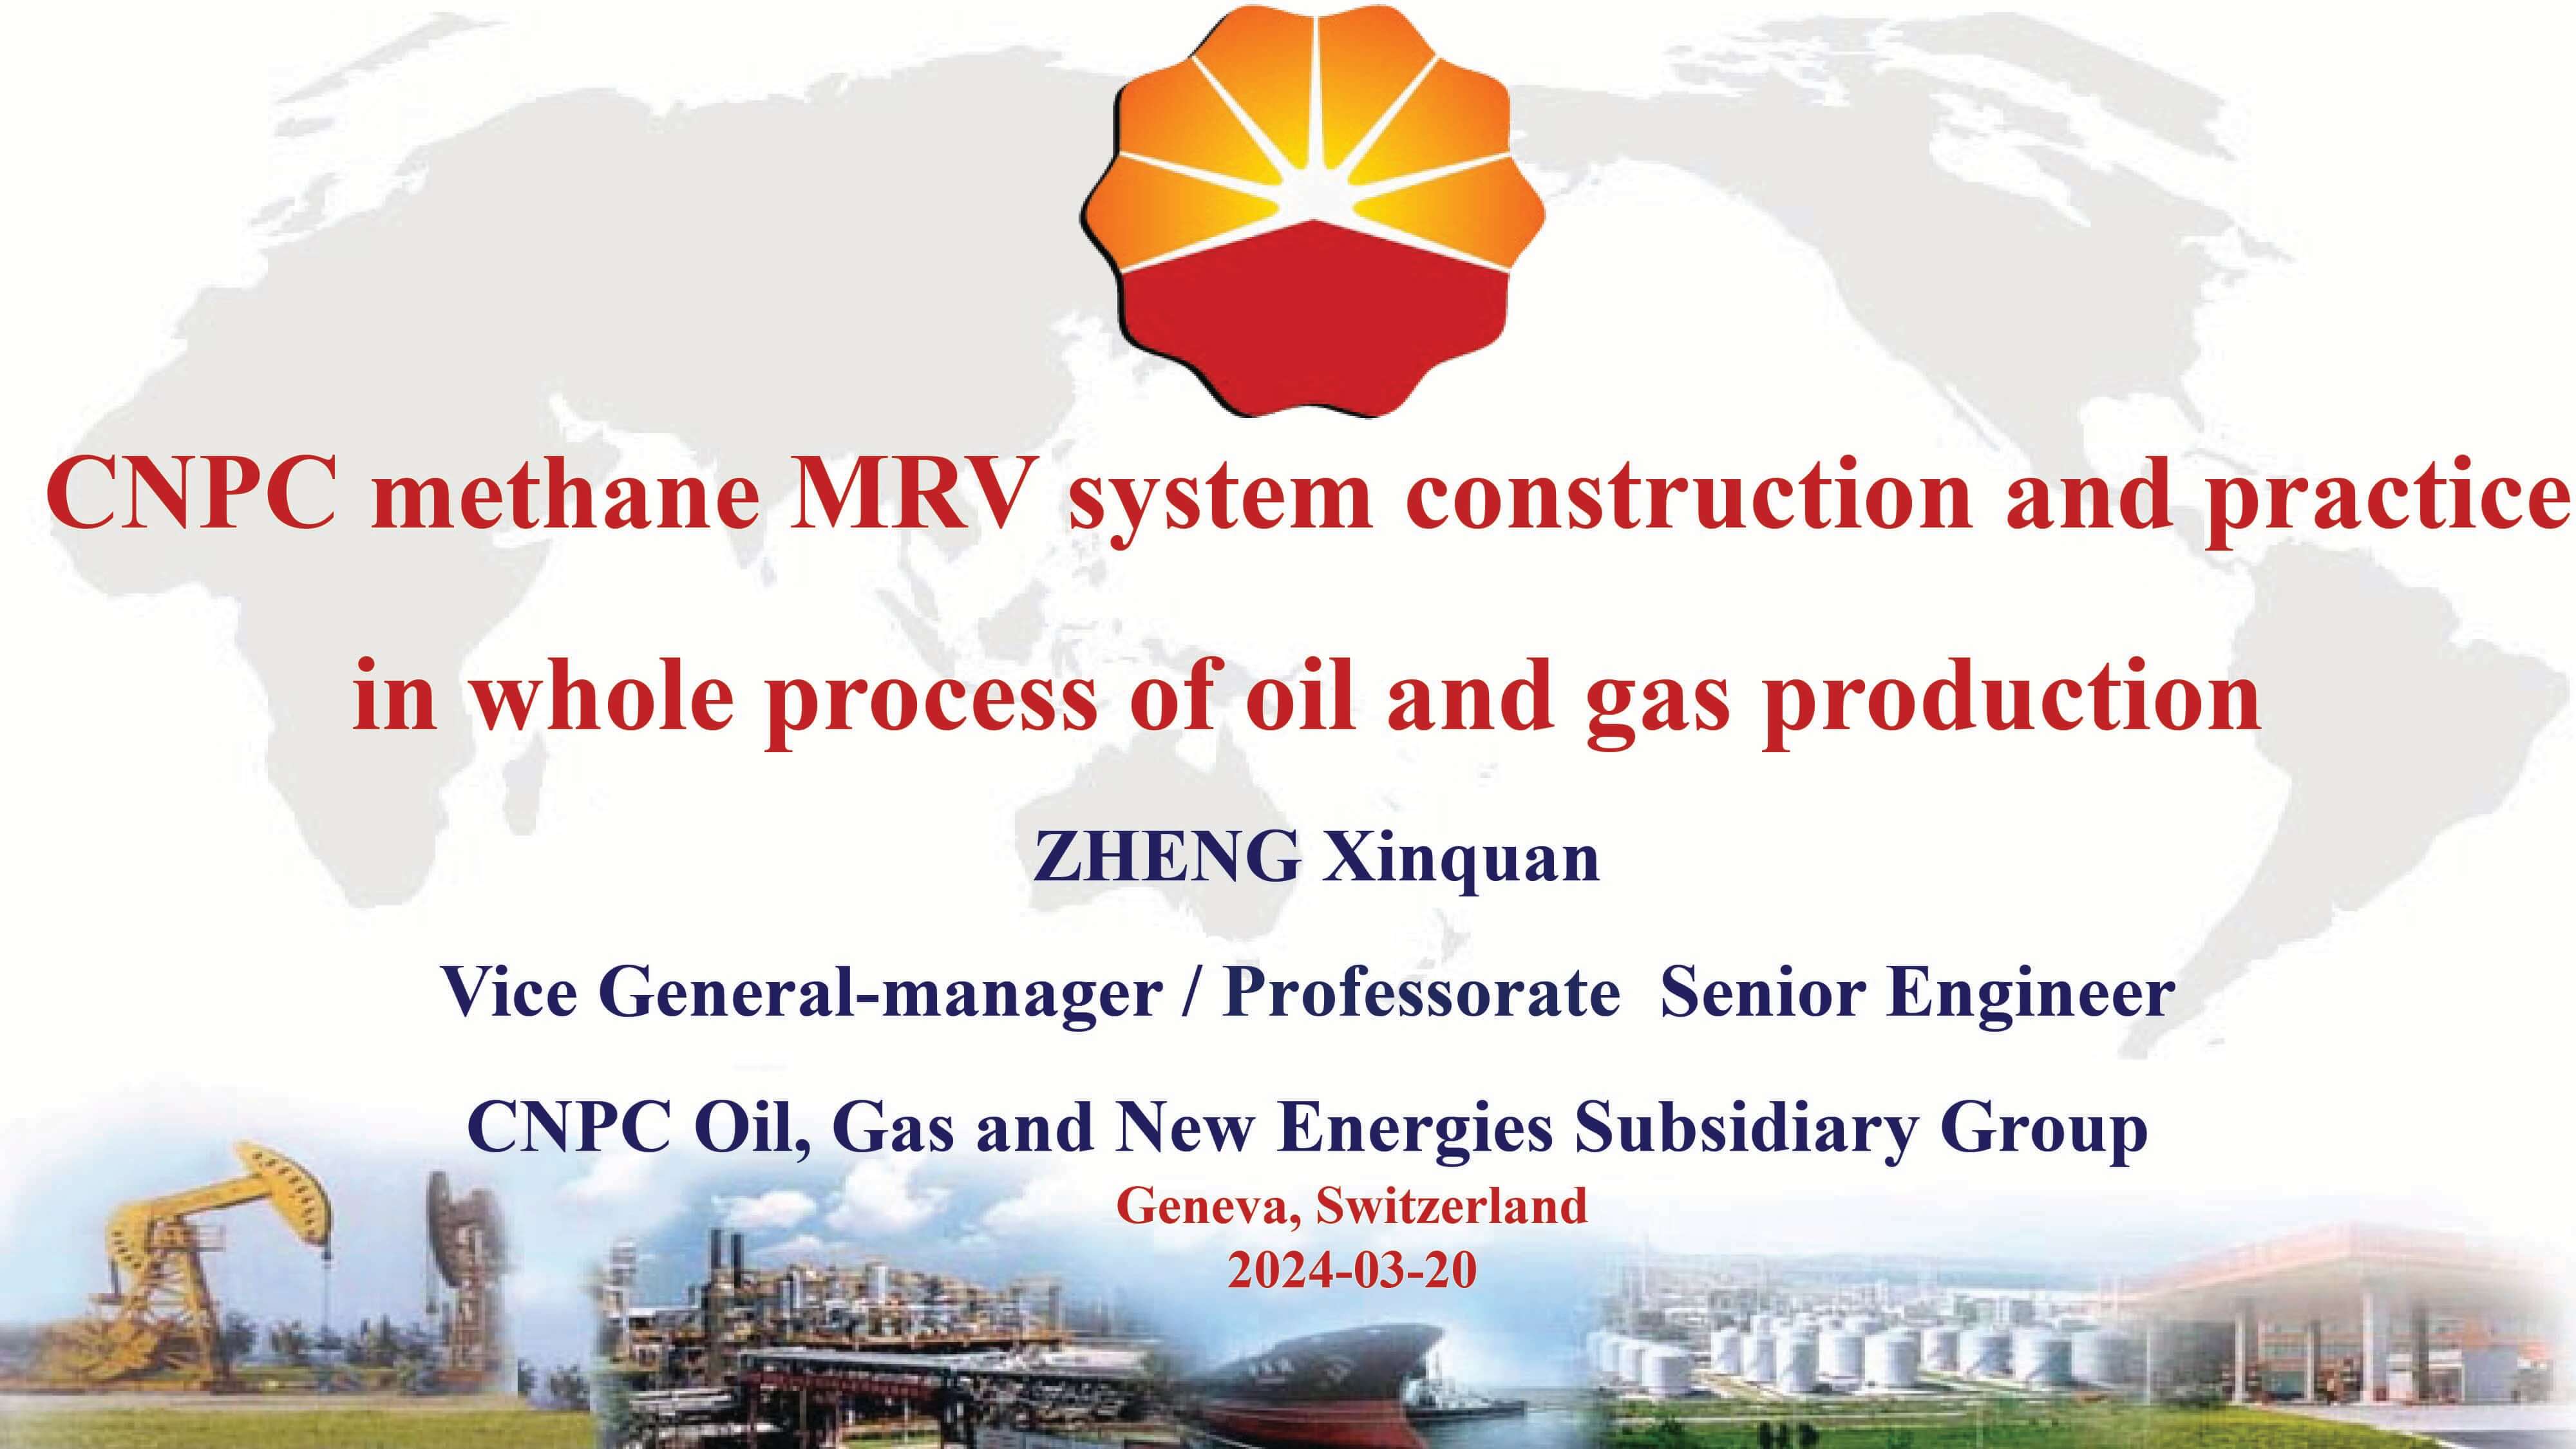 CNPC methane MRV system construction and practice in whole process of oil and gas production